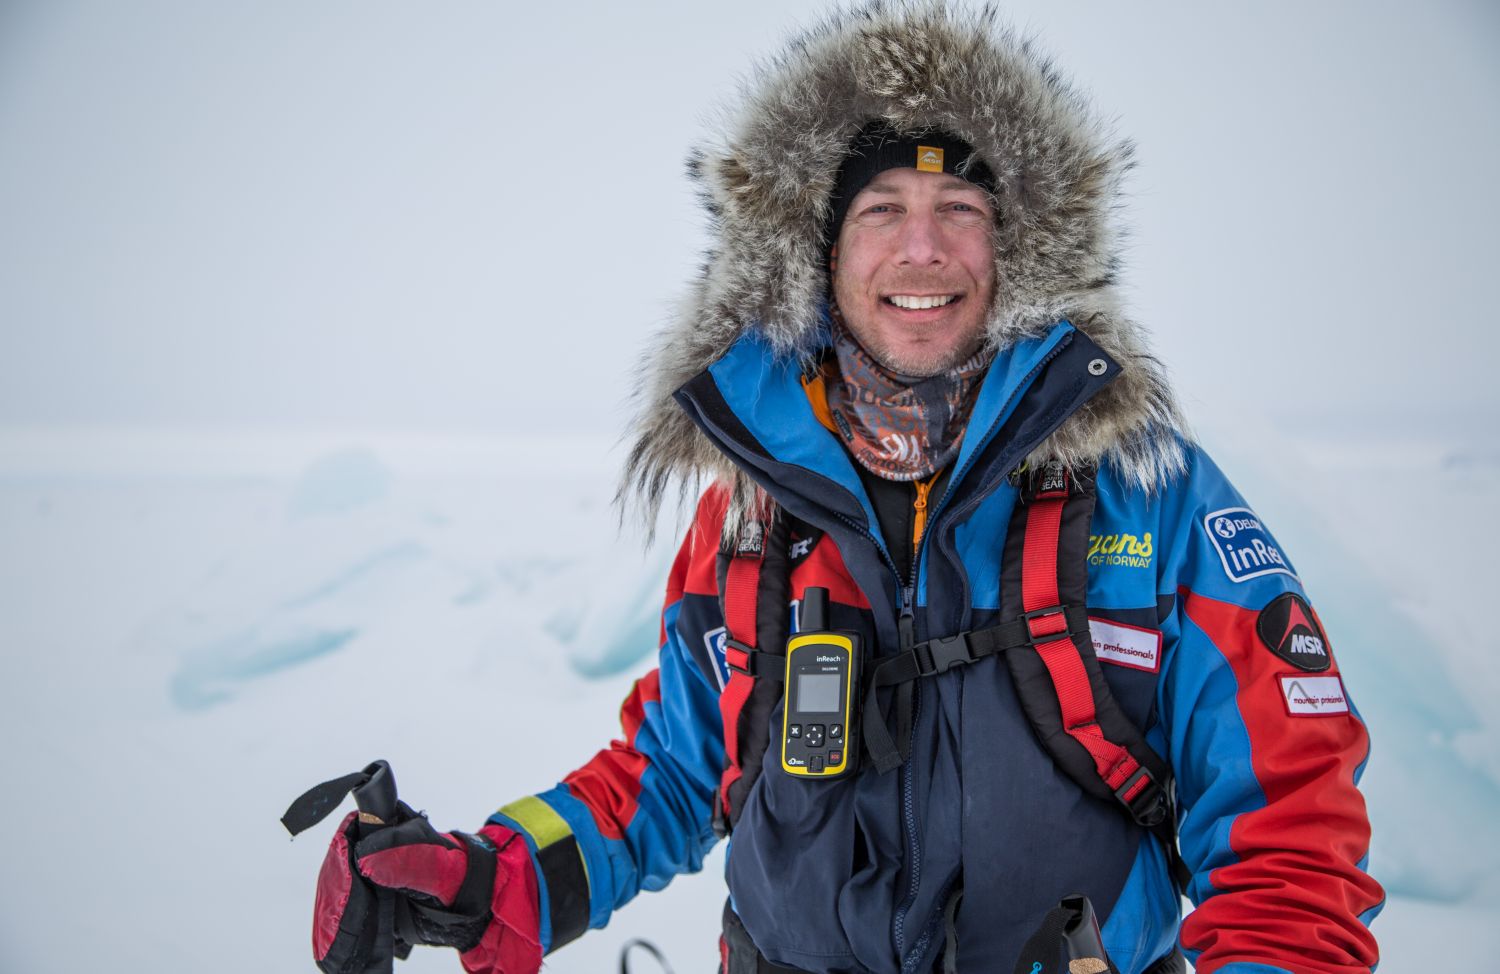 American polar adventurer and educator Eric Larsen is the first person to have set foot at the North Pole, the South Pole, and atop Mount Everest within 365 days. He talks about his fitness regime, the popularity of polar expedition tourism, and offers tips for traveling to the planet’s coldest destinations.